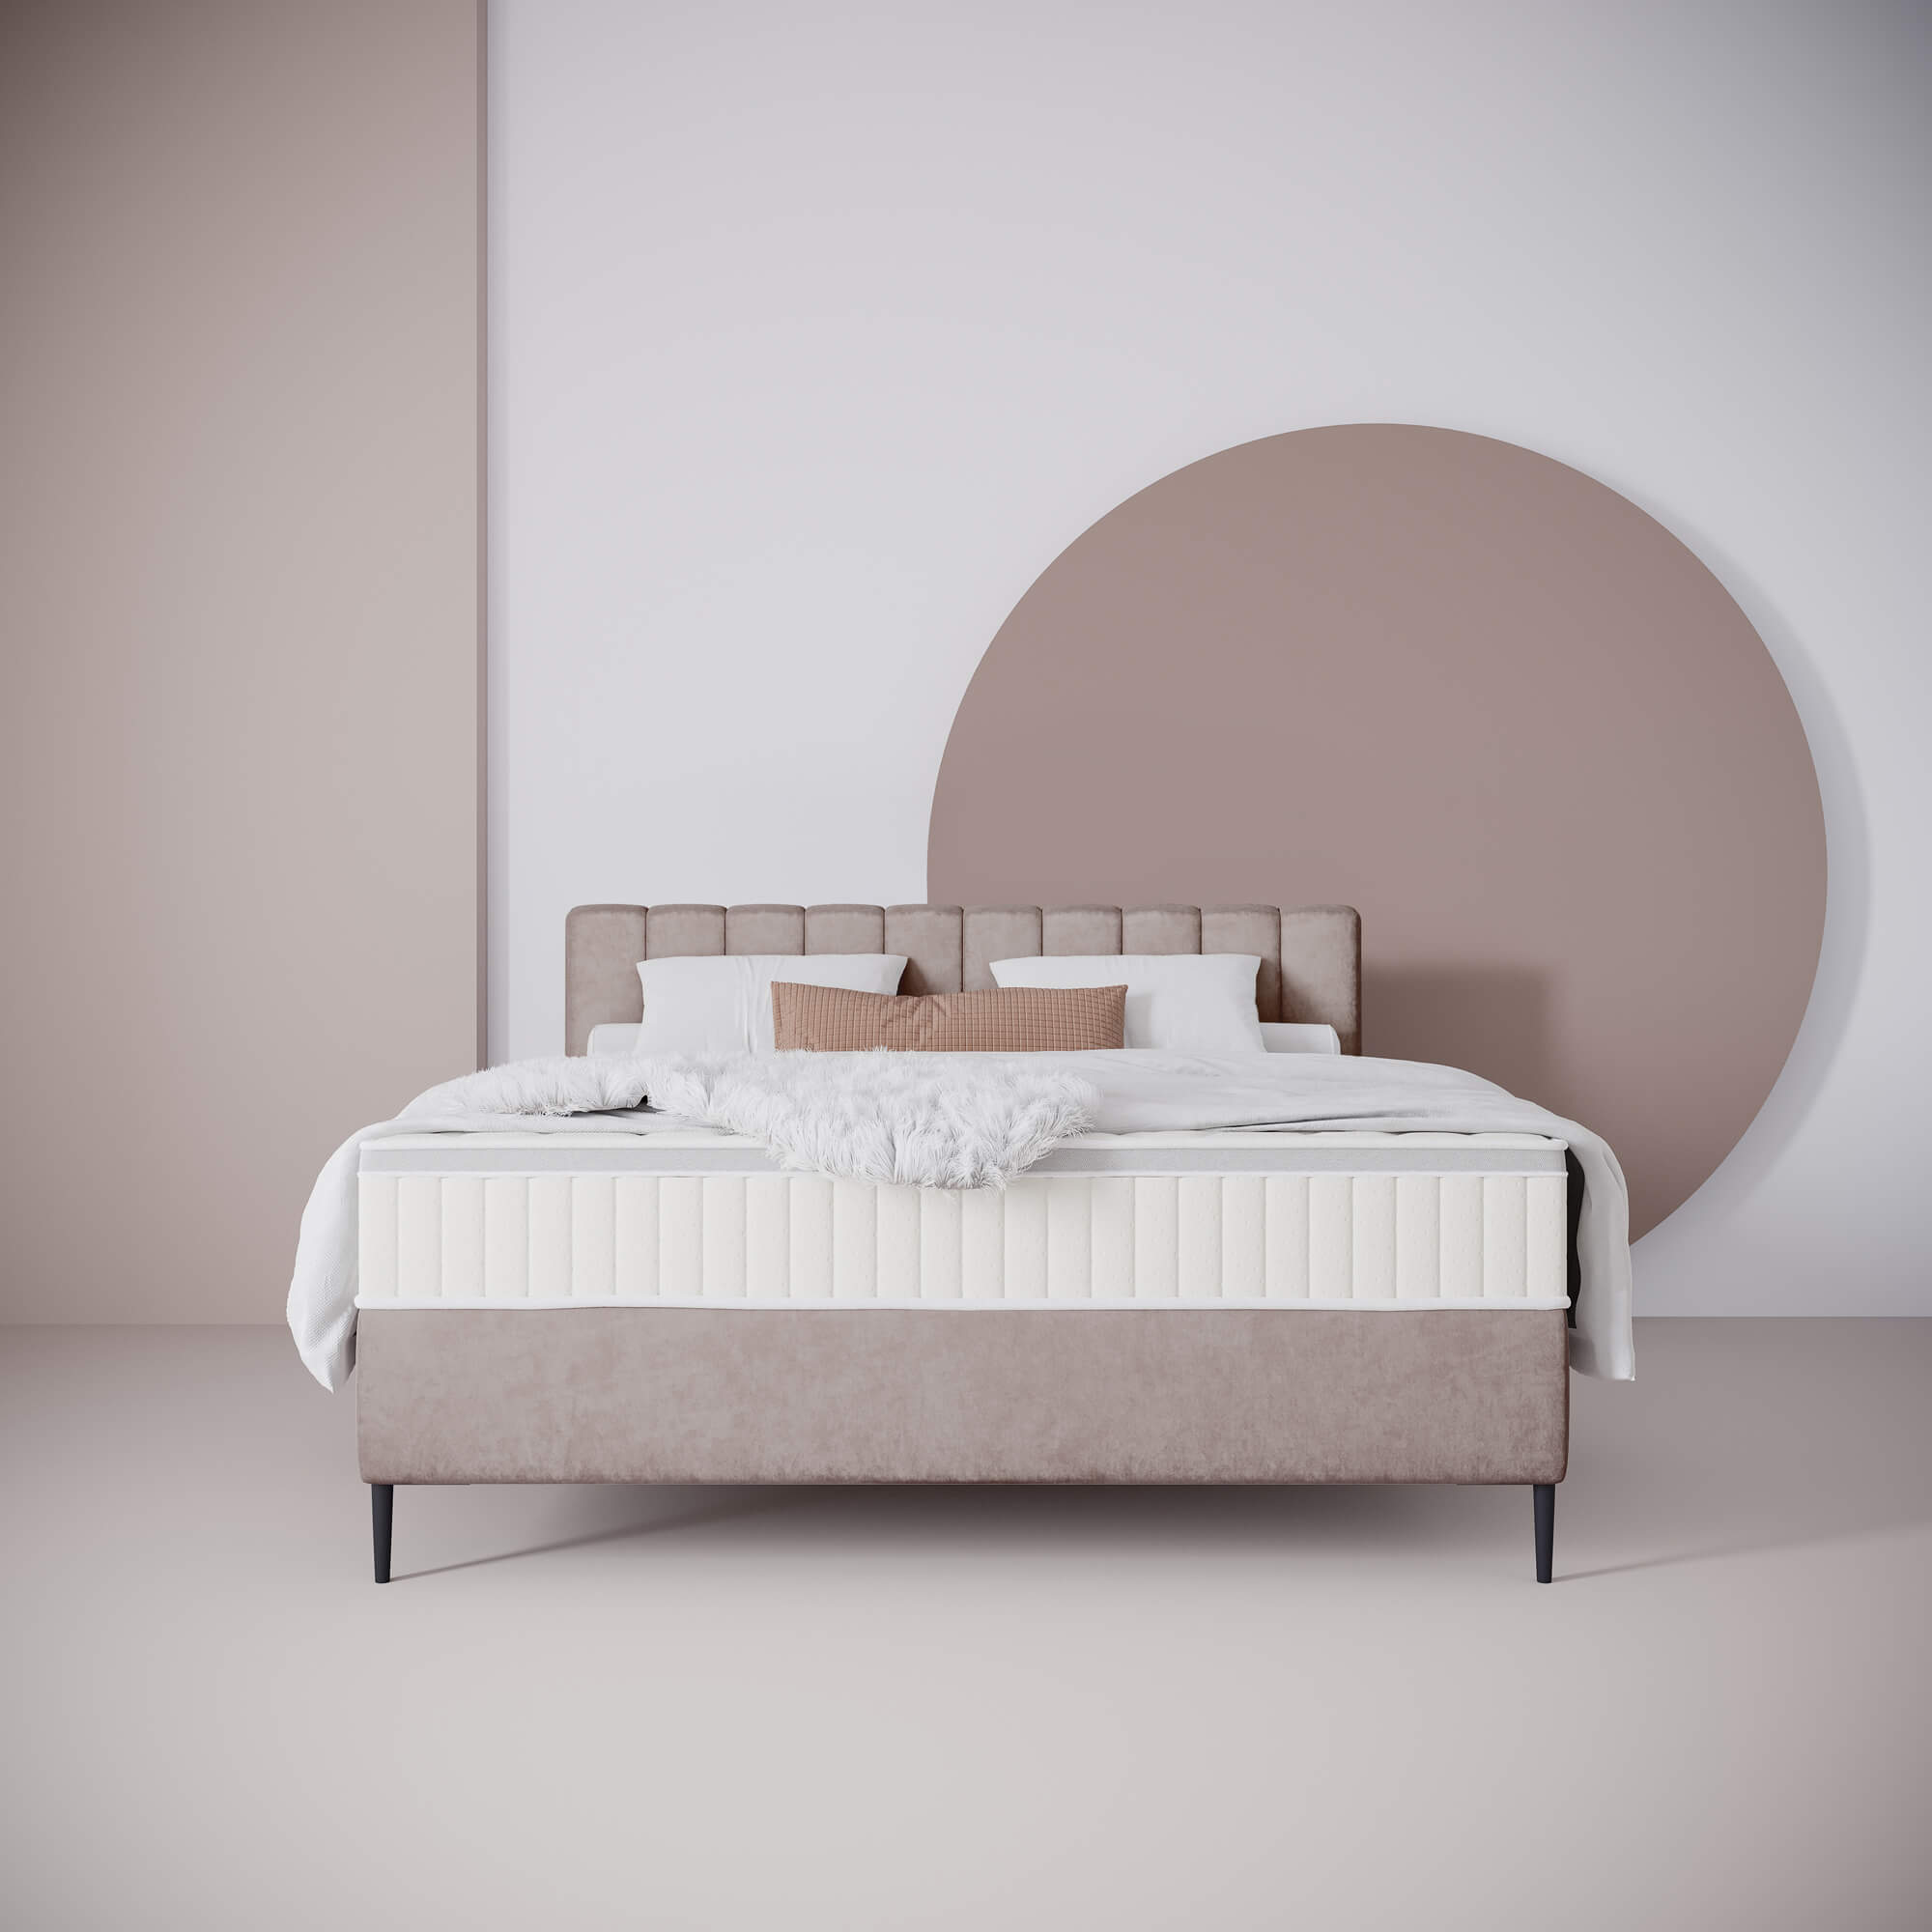 3D Render of Mattress in Conceptual Setting